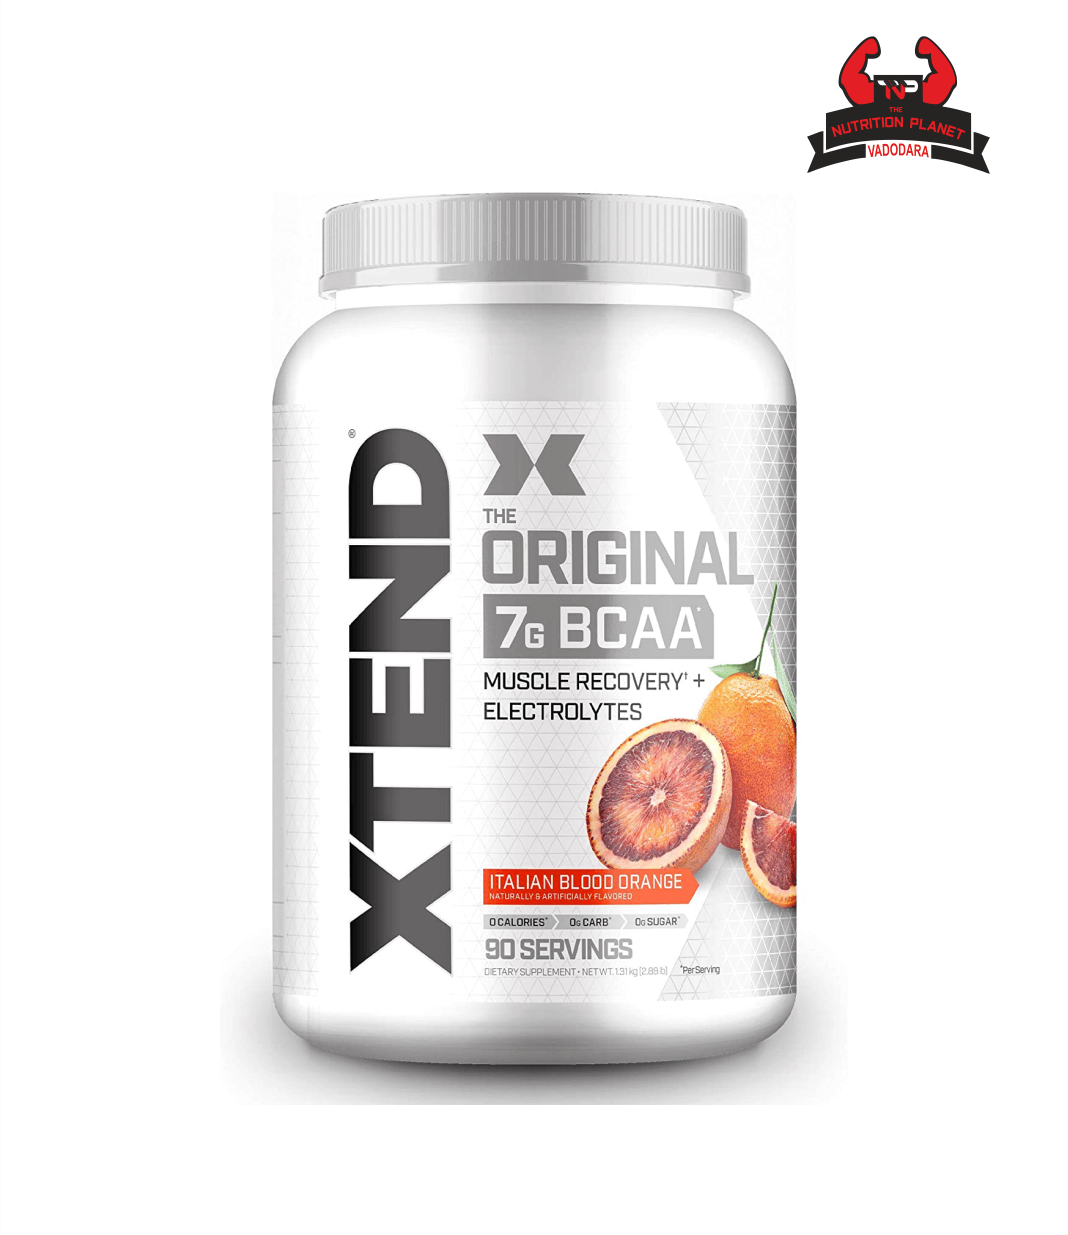 Scivation Xtend Original BCAA Muscle Recovery Electrolytes, 90 Servings